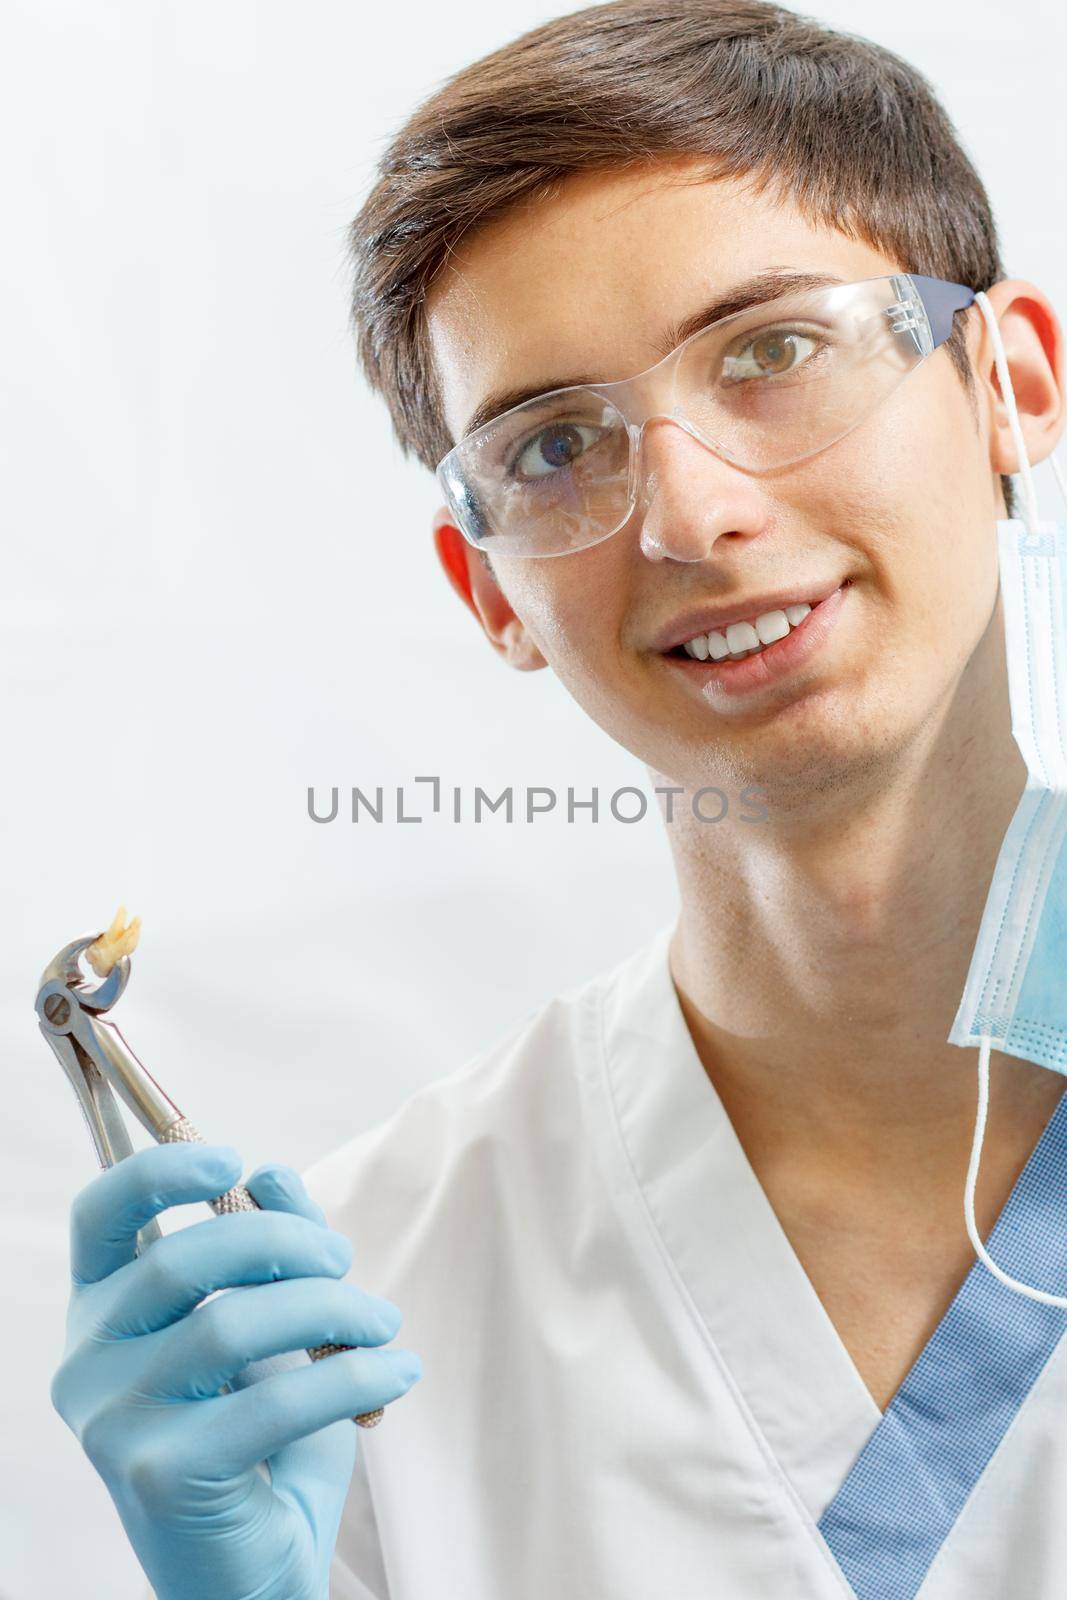 Portrait of handsome male dentist with stainless steel dental tongs or pliers and extracted lower tooth in it. Doctor wearing white uniform, glasses and blue gloves